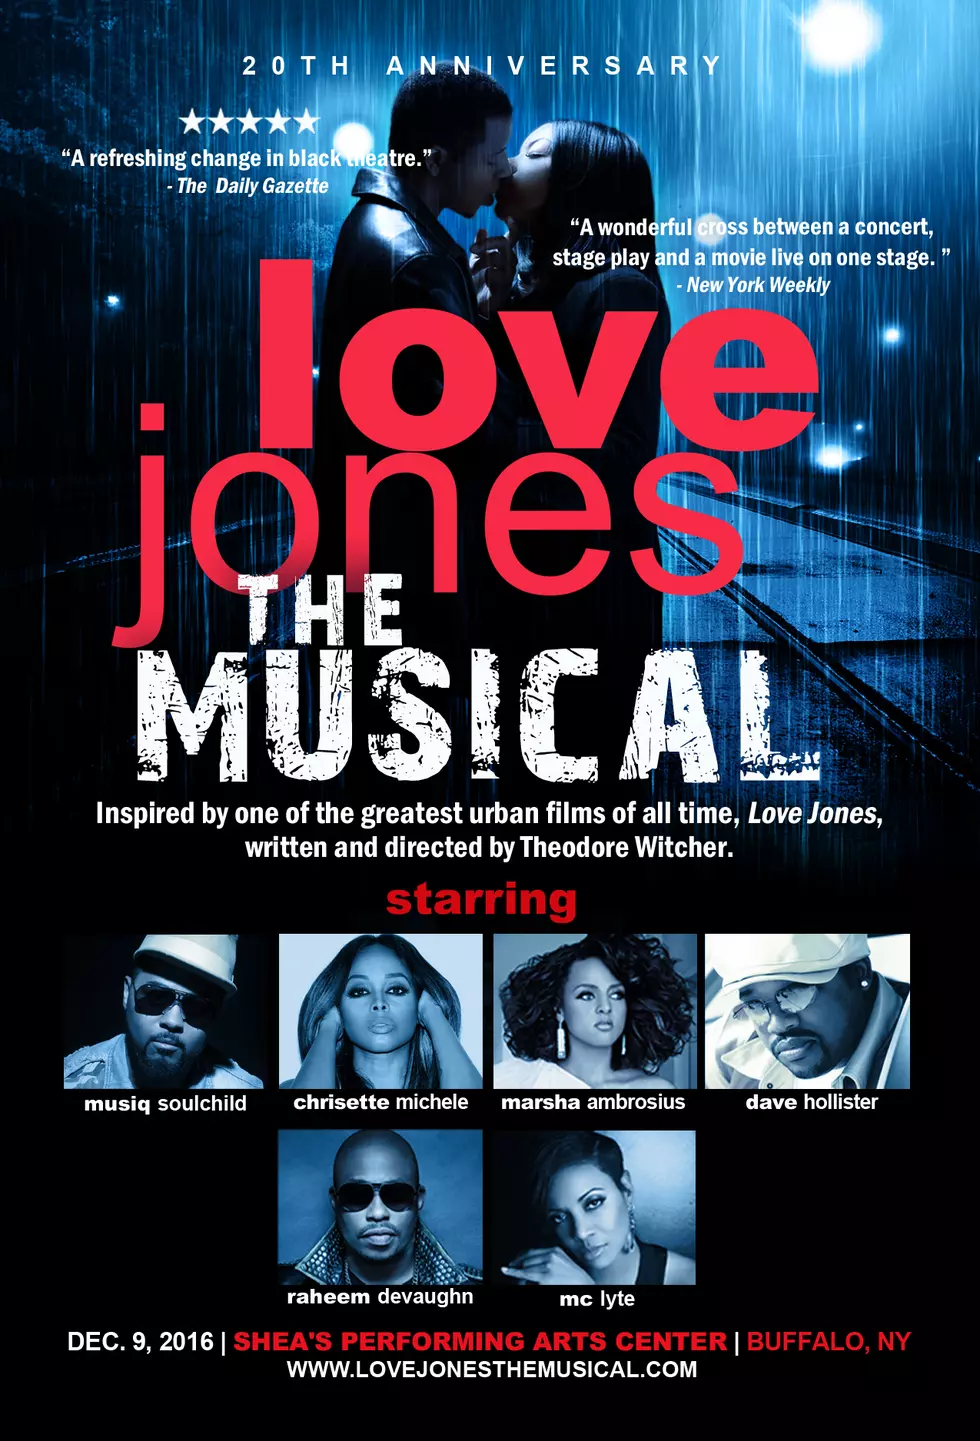 Win Tickets To See “Love Jones” The Musical Before They Go Sale Tomorrow